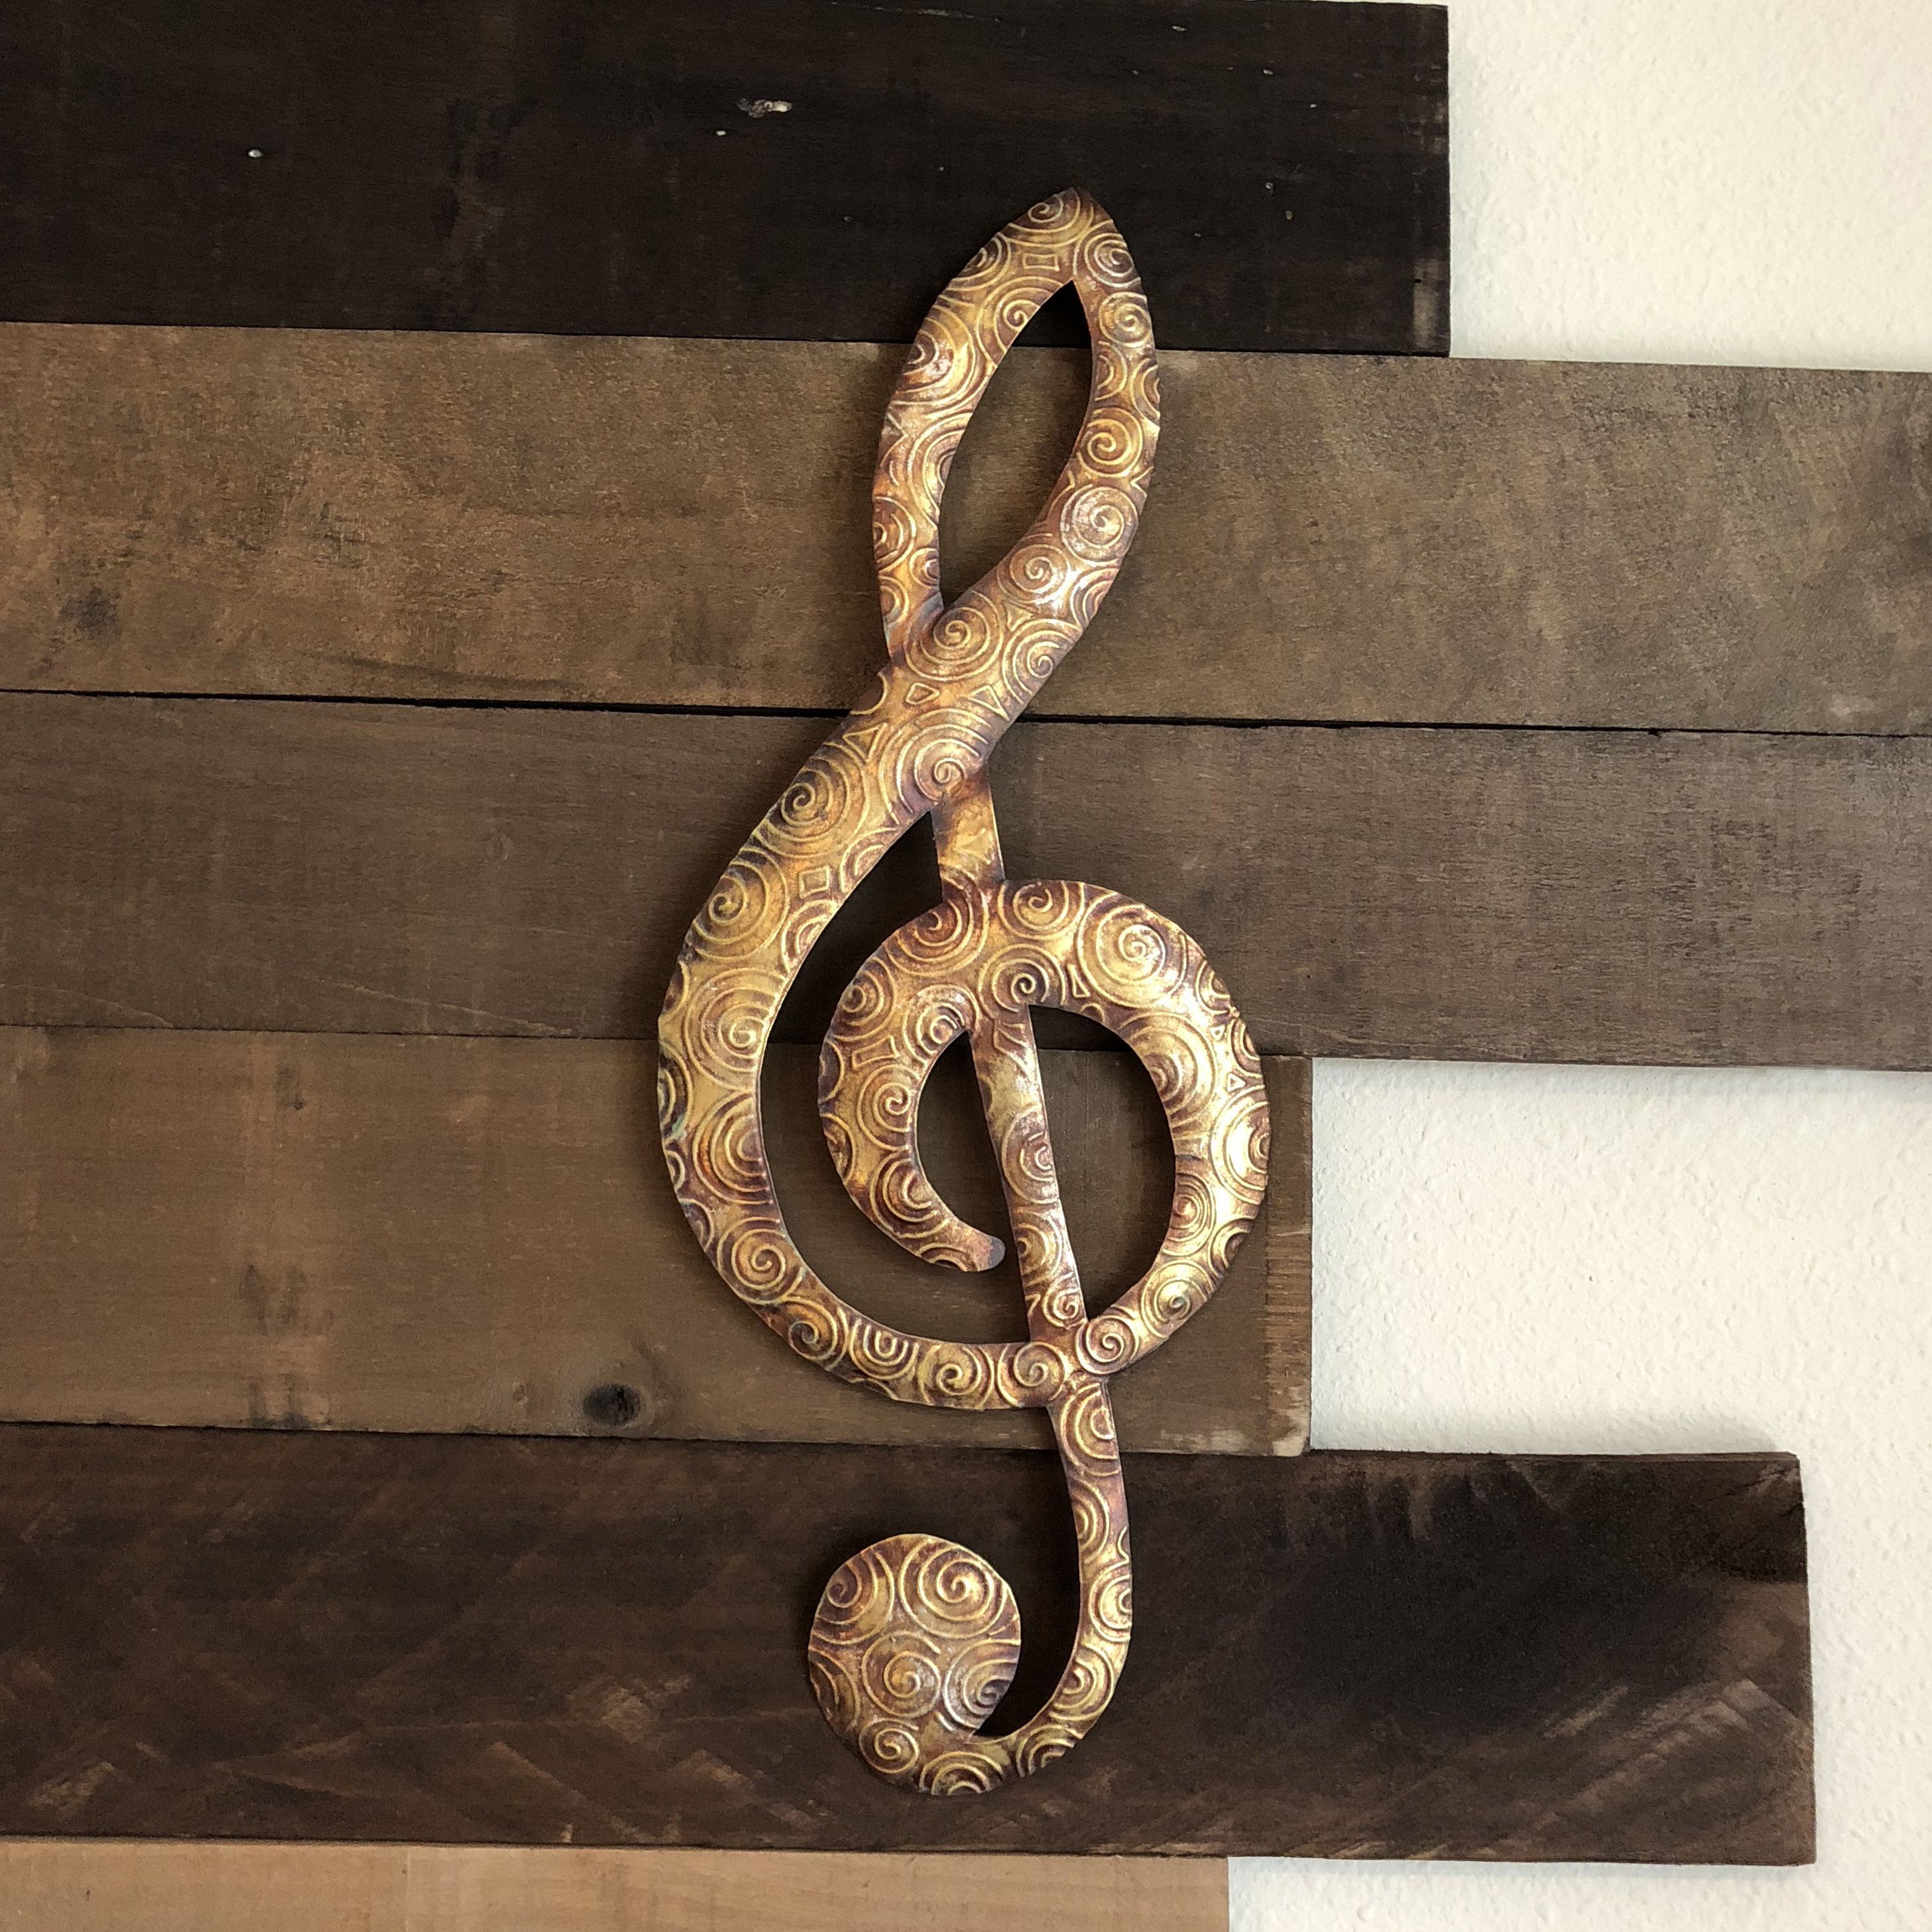 Widely Used Winston Porter Traditional Music Note Metal Wall Decor & Reviews In Metal Wall Decor By Winston Porter (View 5 of 20)